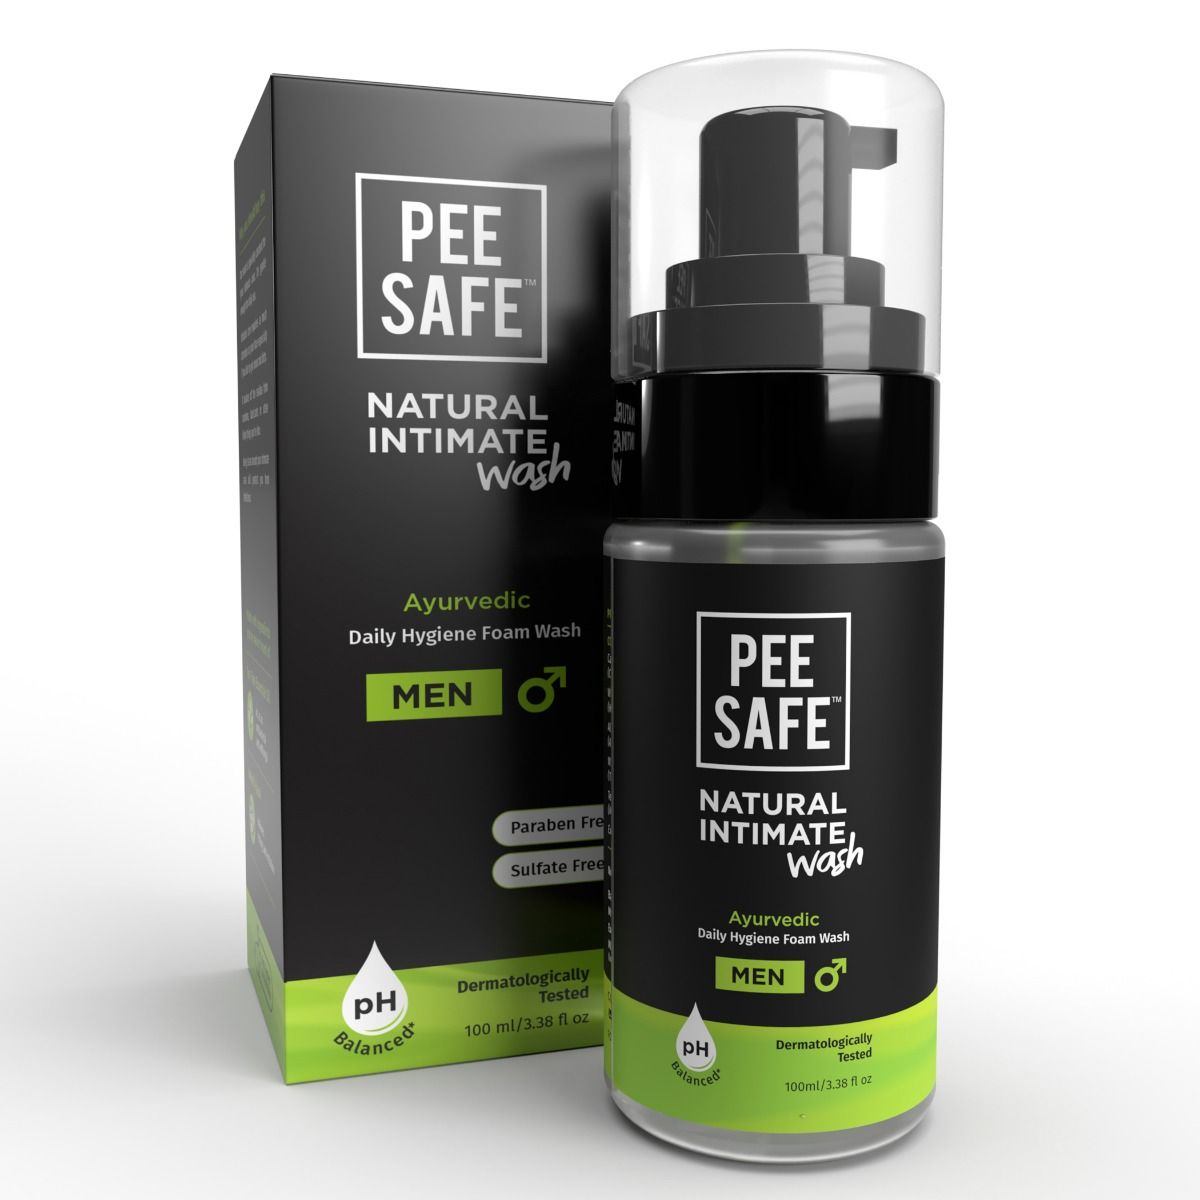 Pee Safe Natural Intimate Wash for Men, 100 ml, Pack of 1 